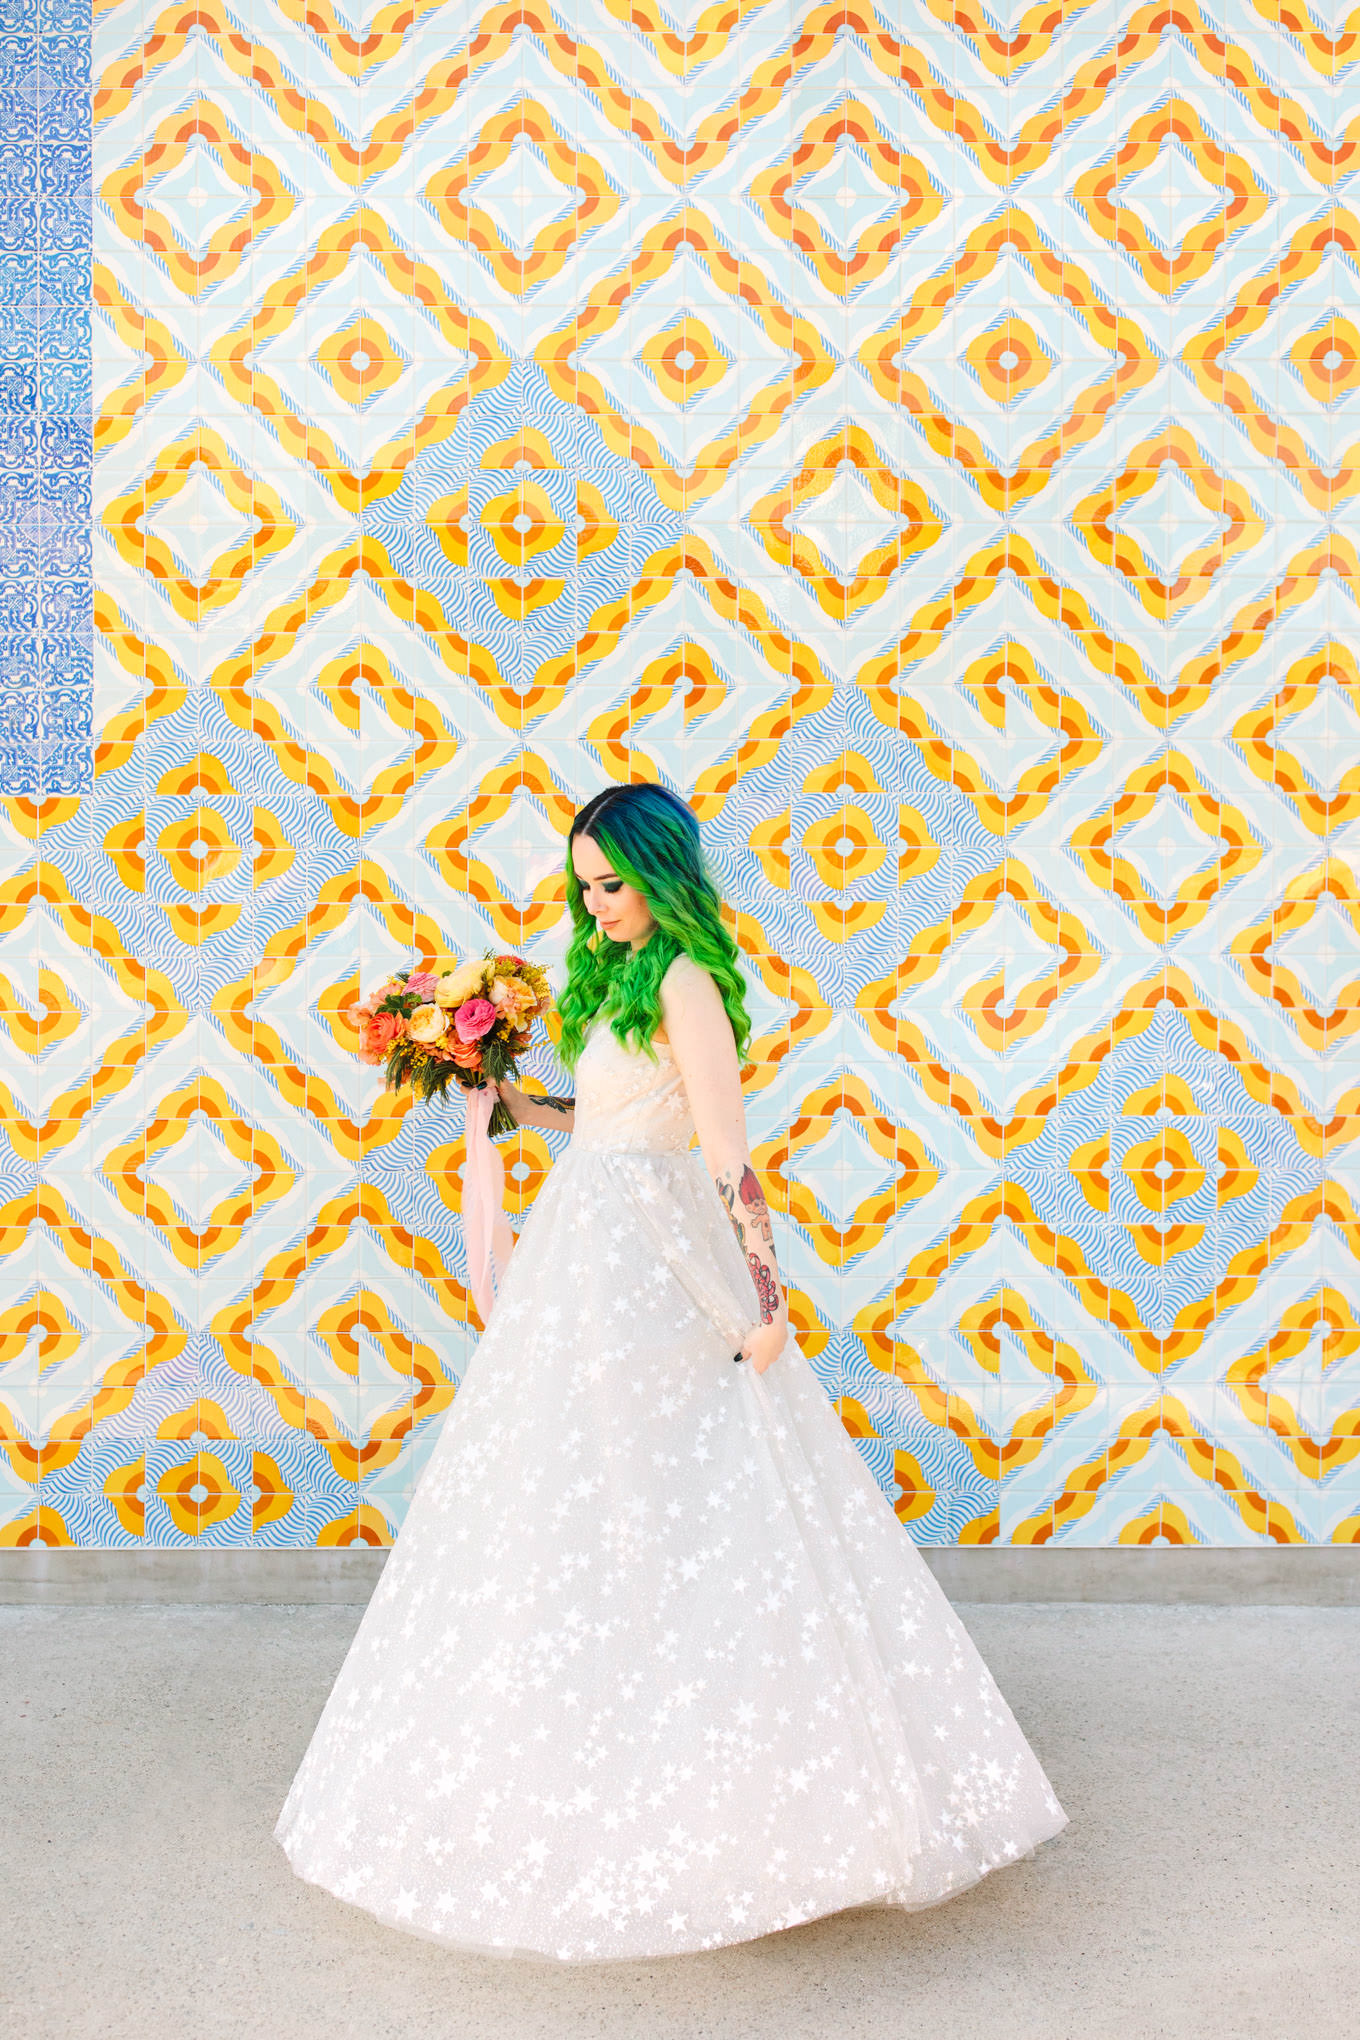 Bride in star gown with teal and green hair | Engagement, elopement, and wedding photography roundup of Mary Costa’s favorite images from 2020 | Colorful and elevated photography for fun-loving couples in Southern California | #2020wedding #elopement #weddingphoto #unicornhair #weddingphotography   Source: Mary Costa Photography | Los Angeles